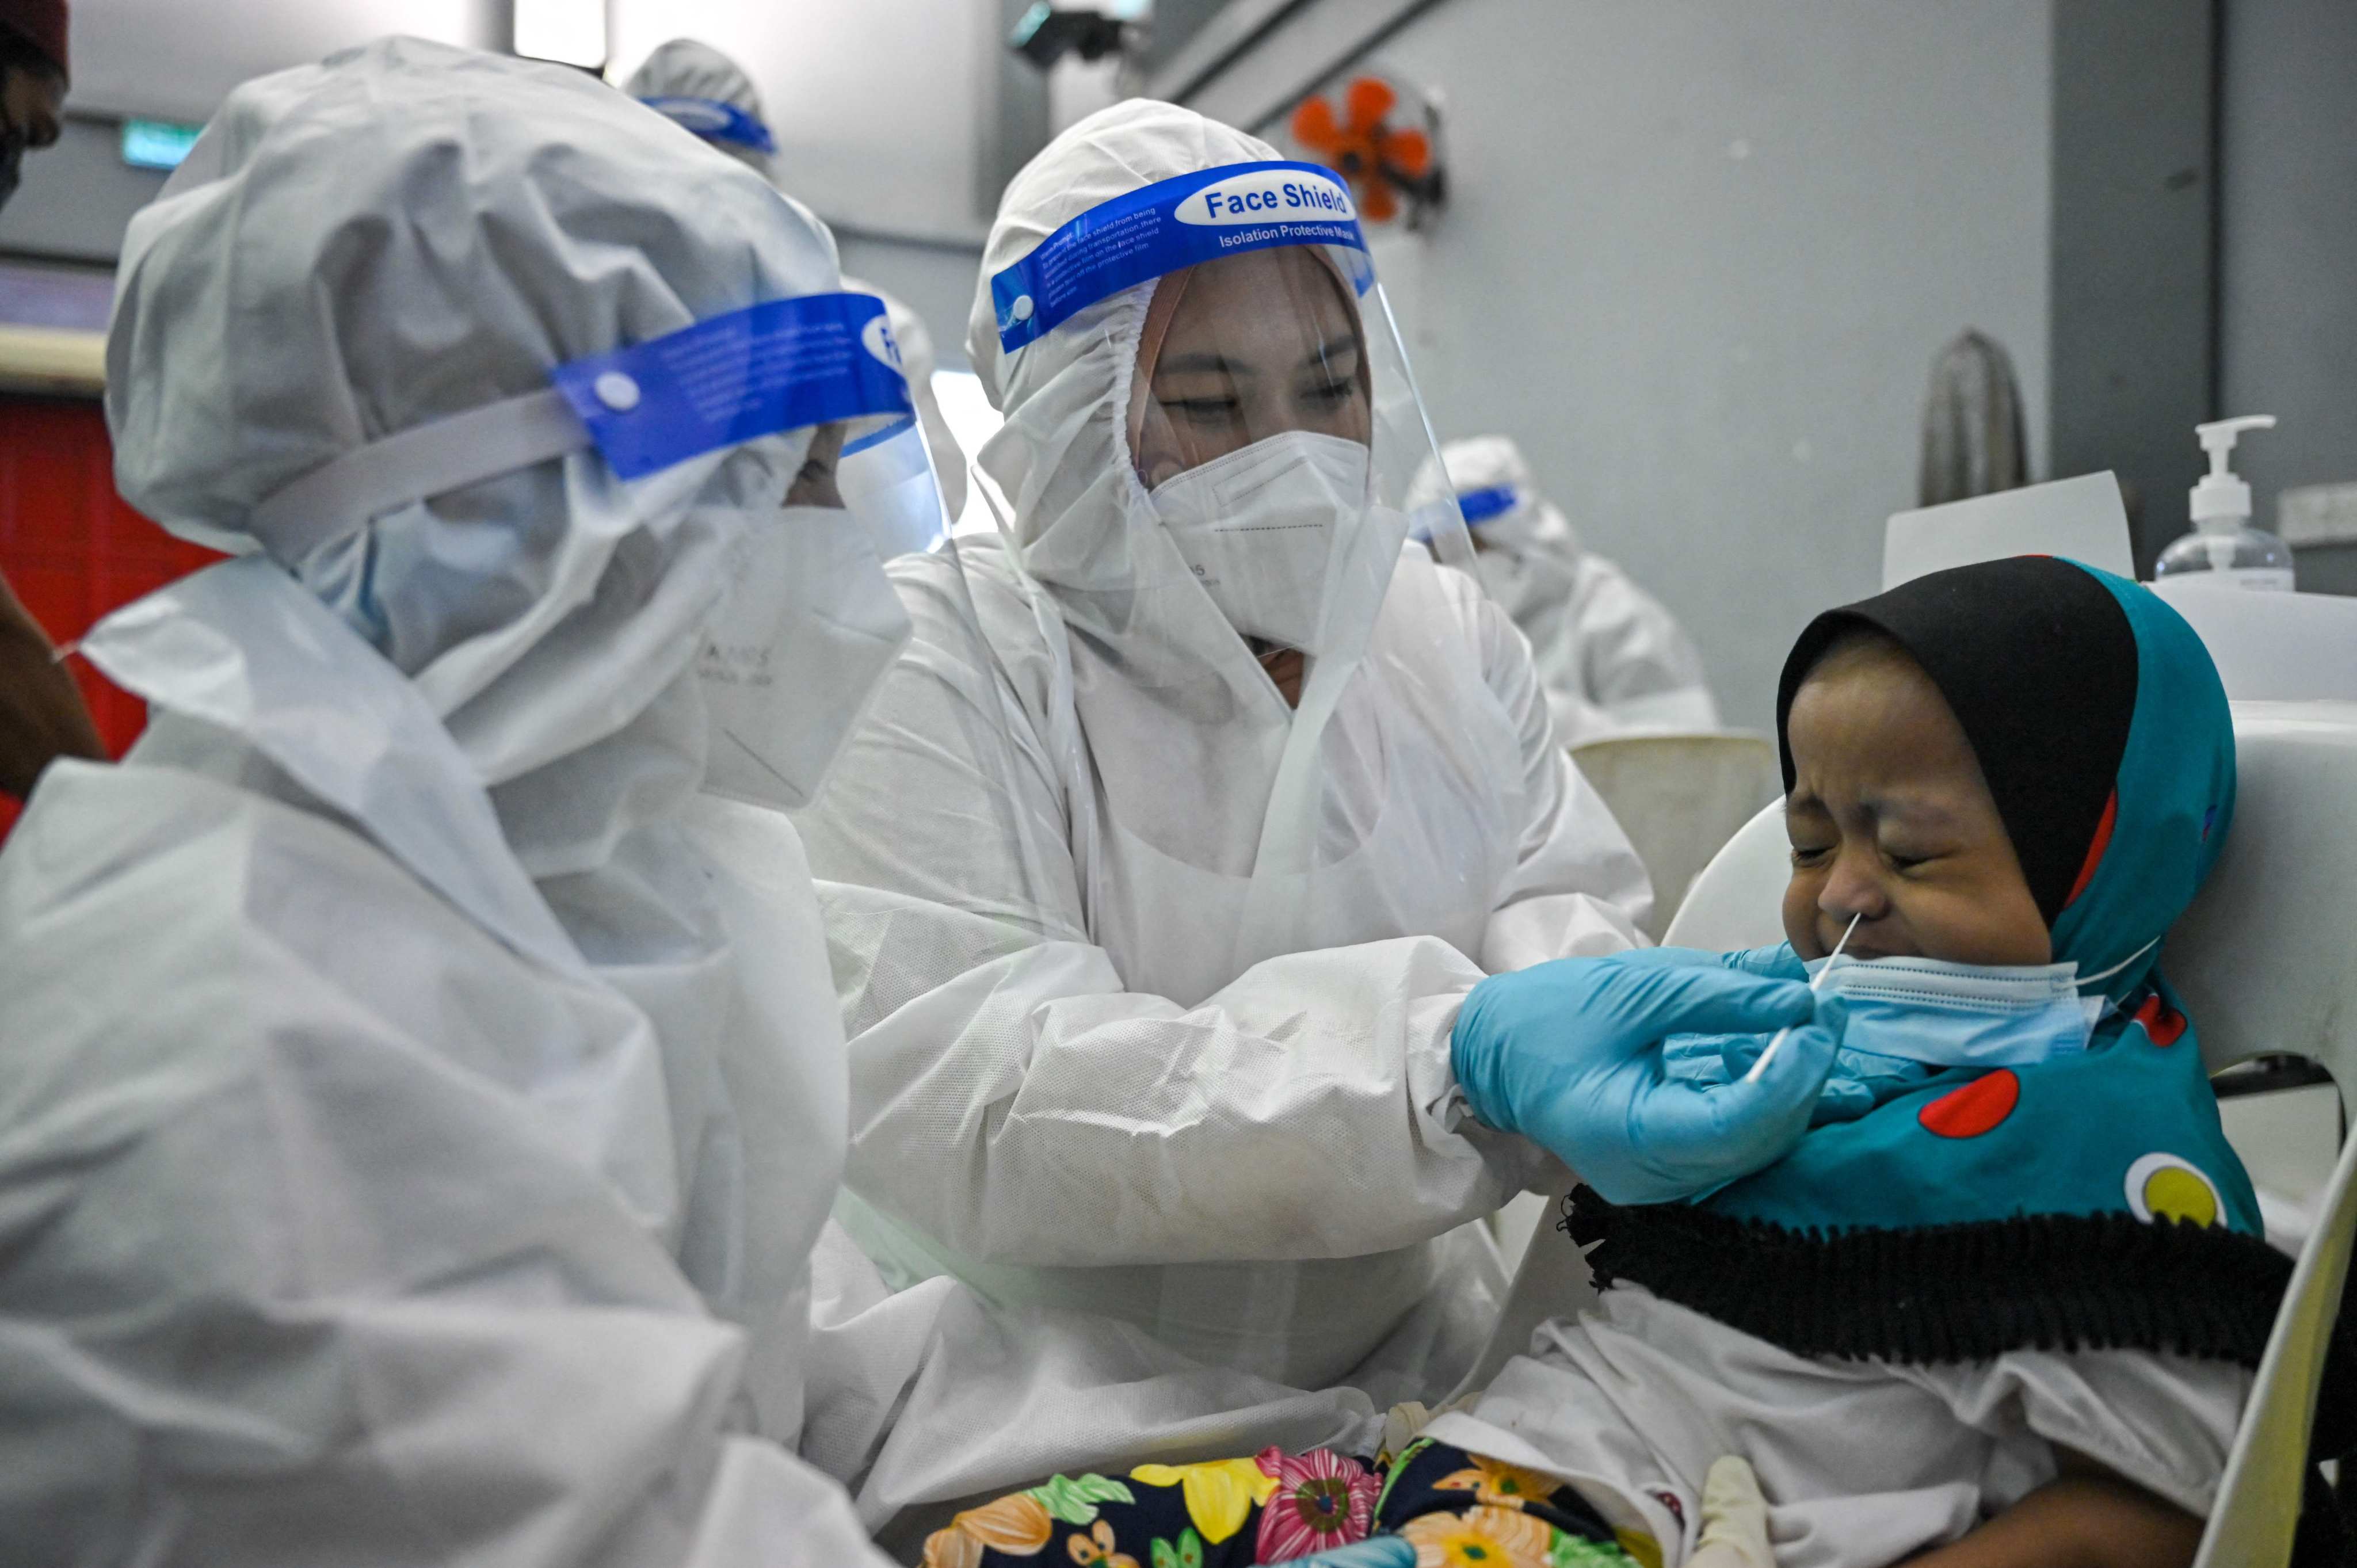 A medical worker tests a child at a free Covid-19 testing site in Shah Alam, on the outskirts of Kuala Lumpur, Malaysia. Photo: AFP